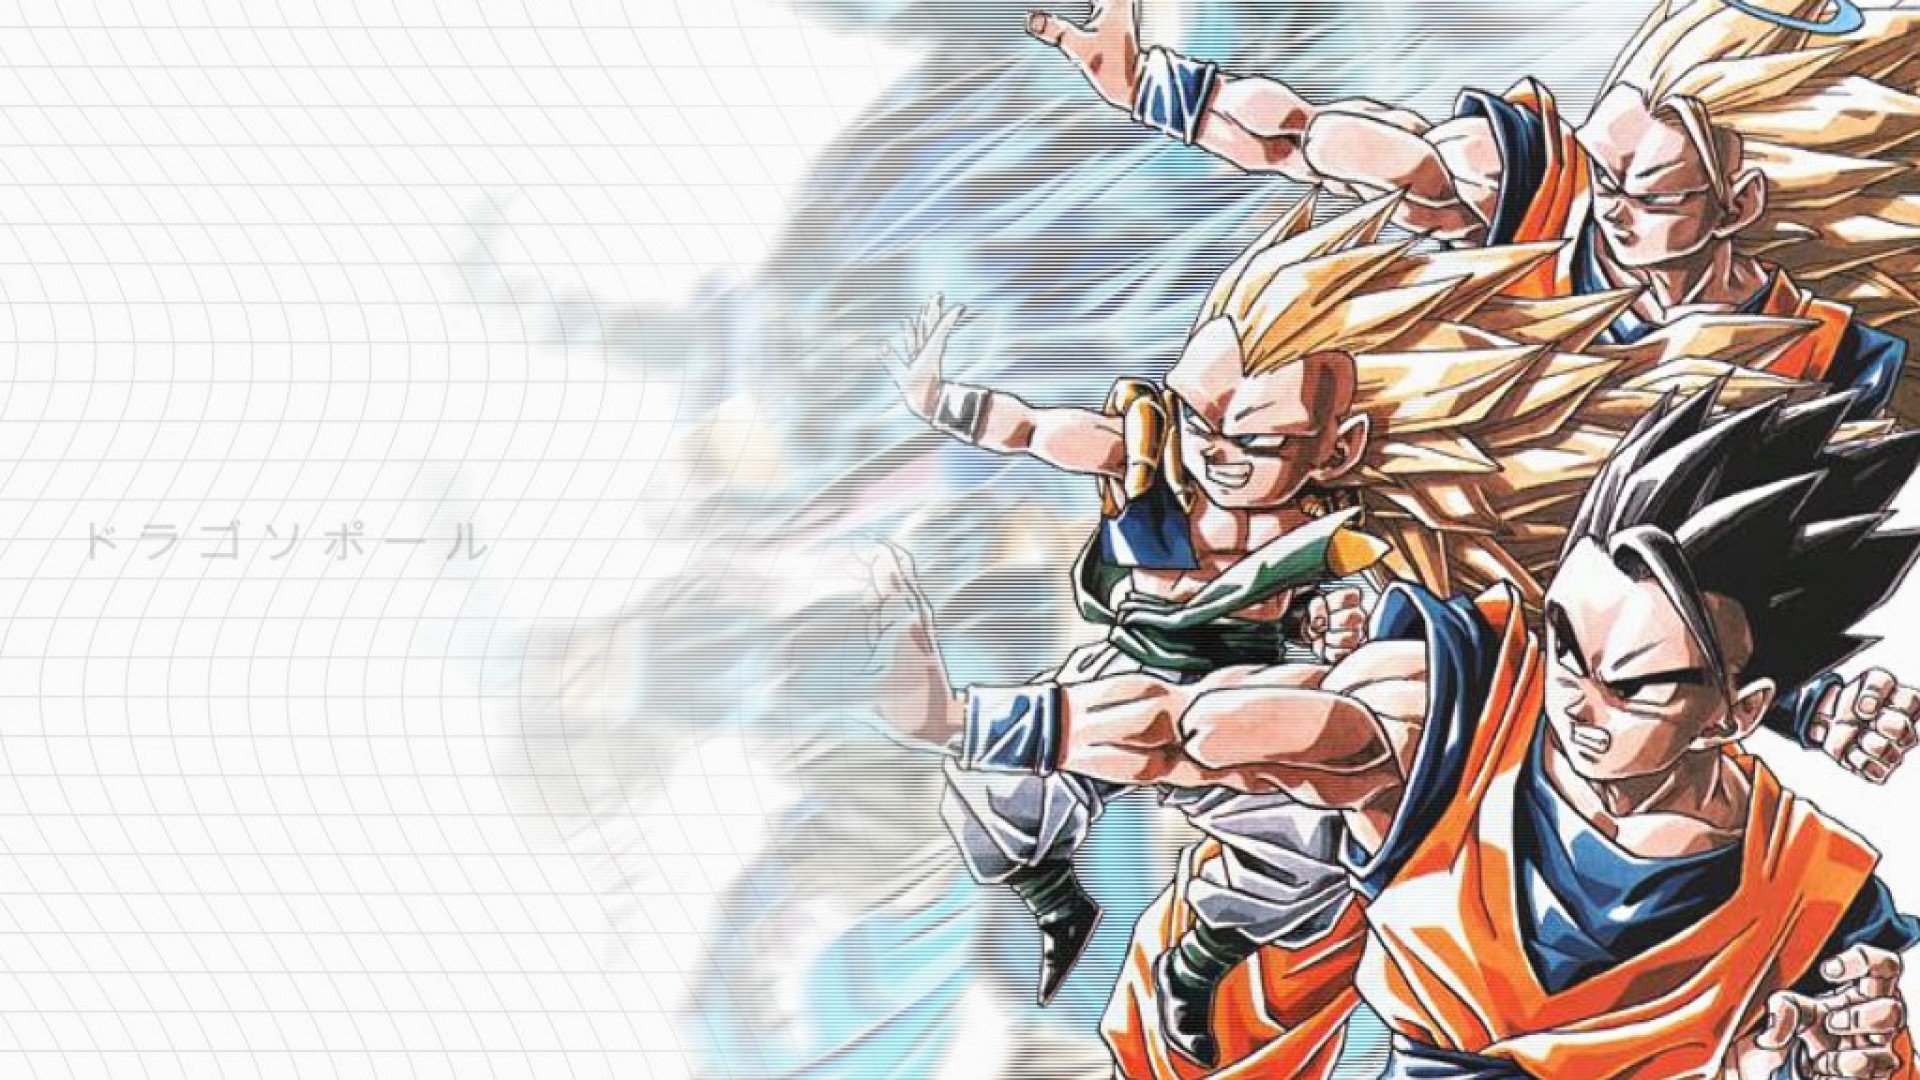 Dragon Ball Z HD Wallpapers and Backgrounds 1920Ã1200 Dragonball Z Wallpaper  (33 Wallpapers